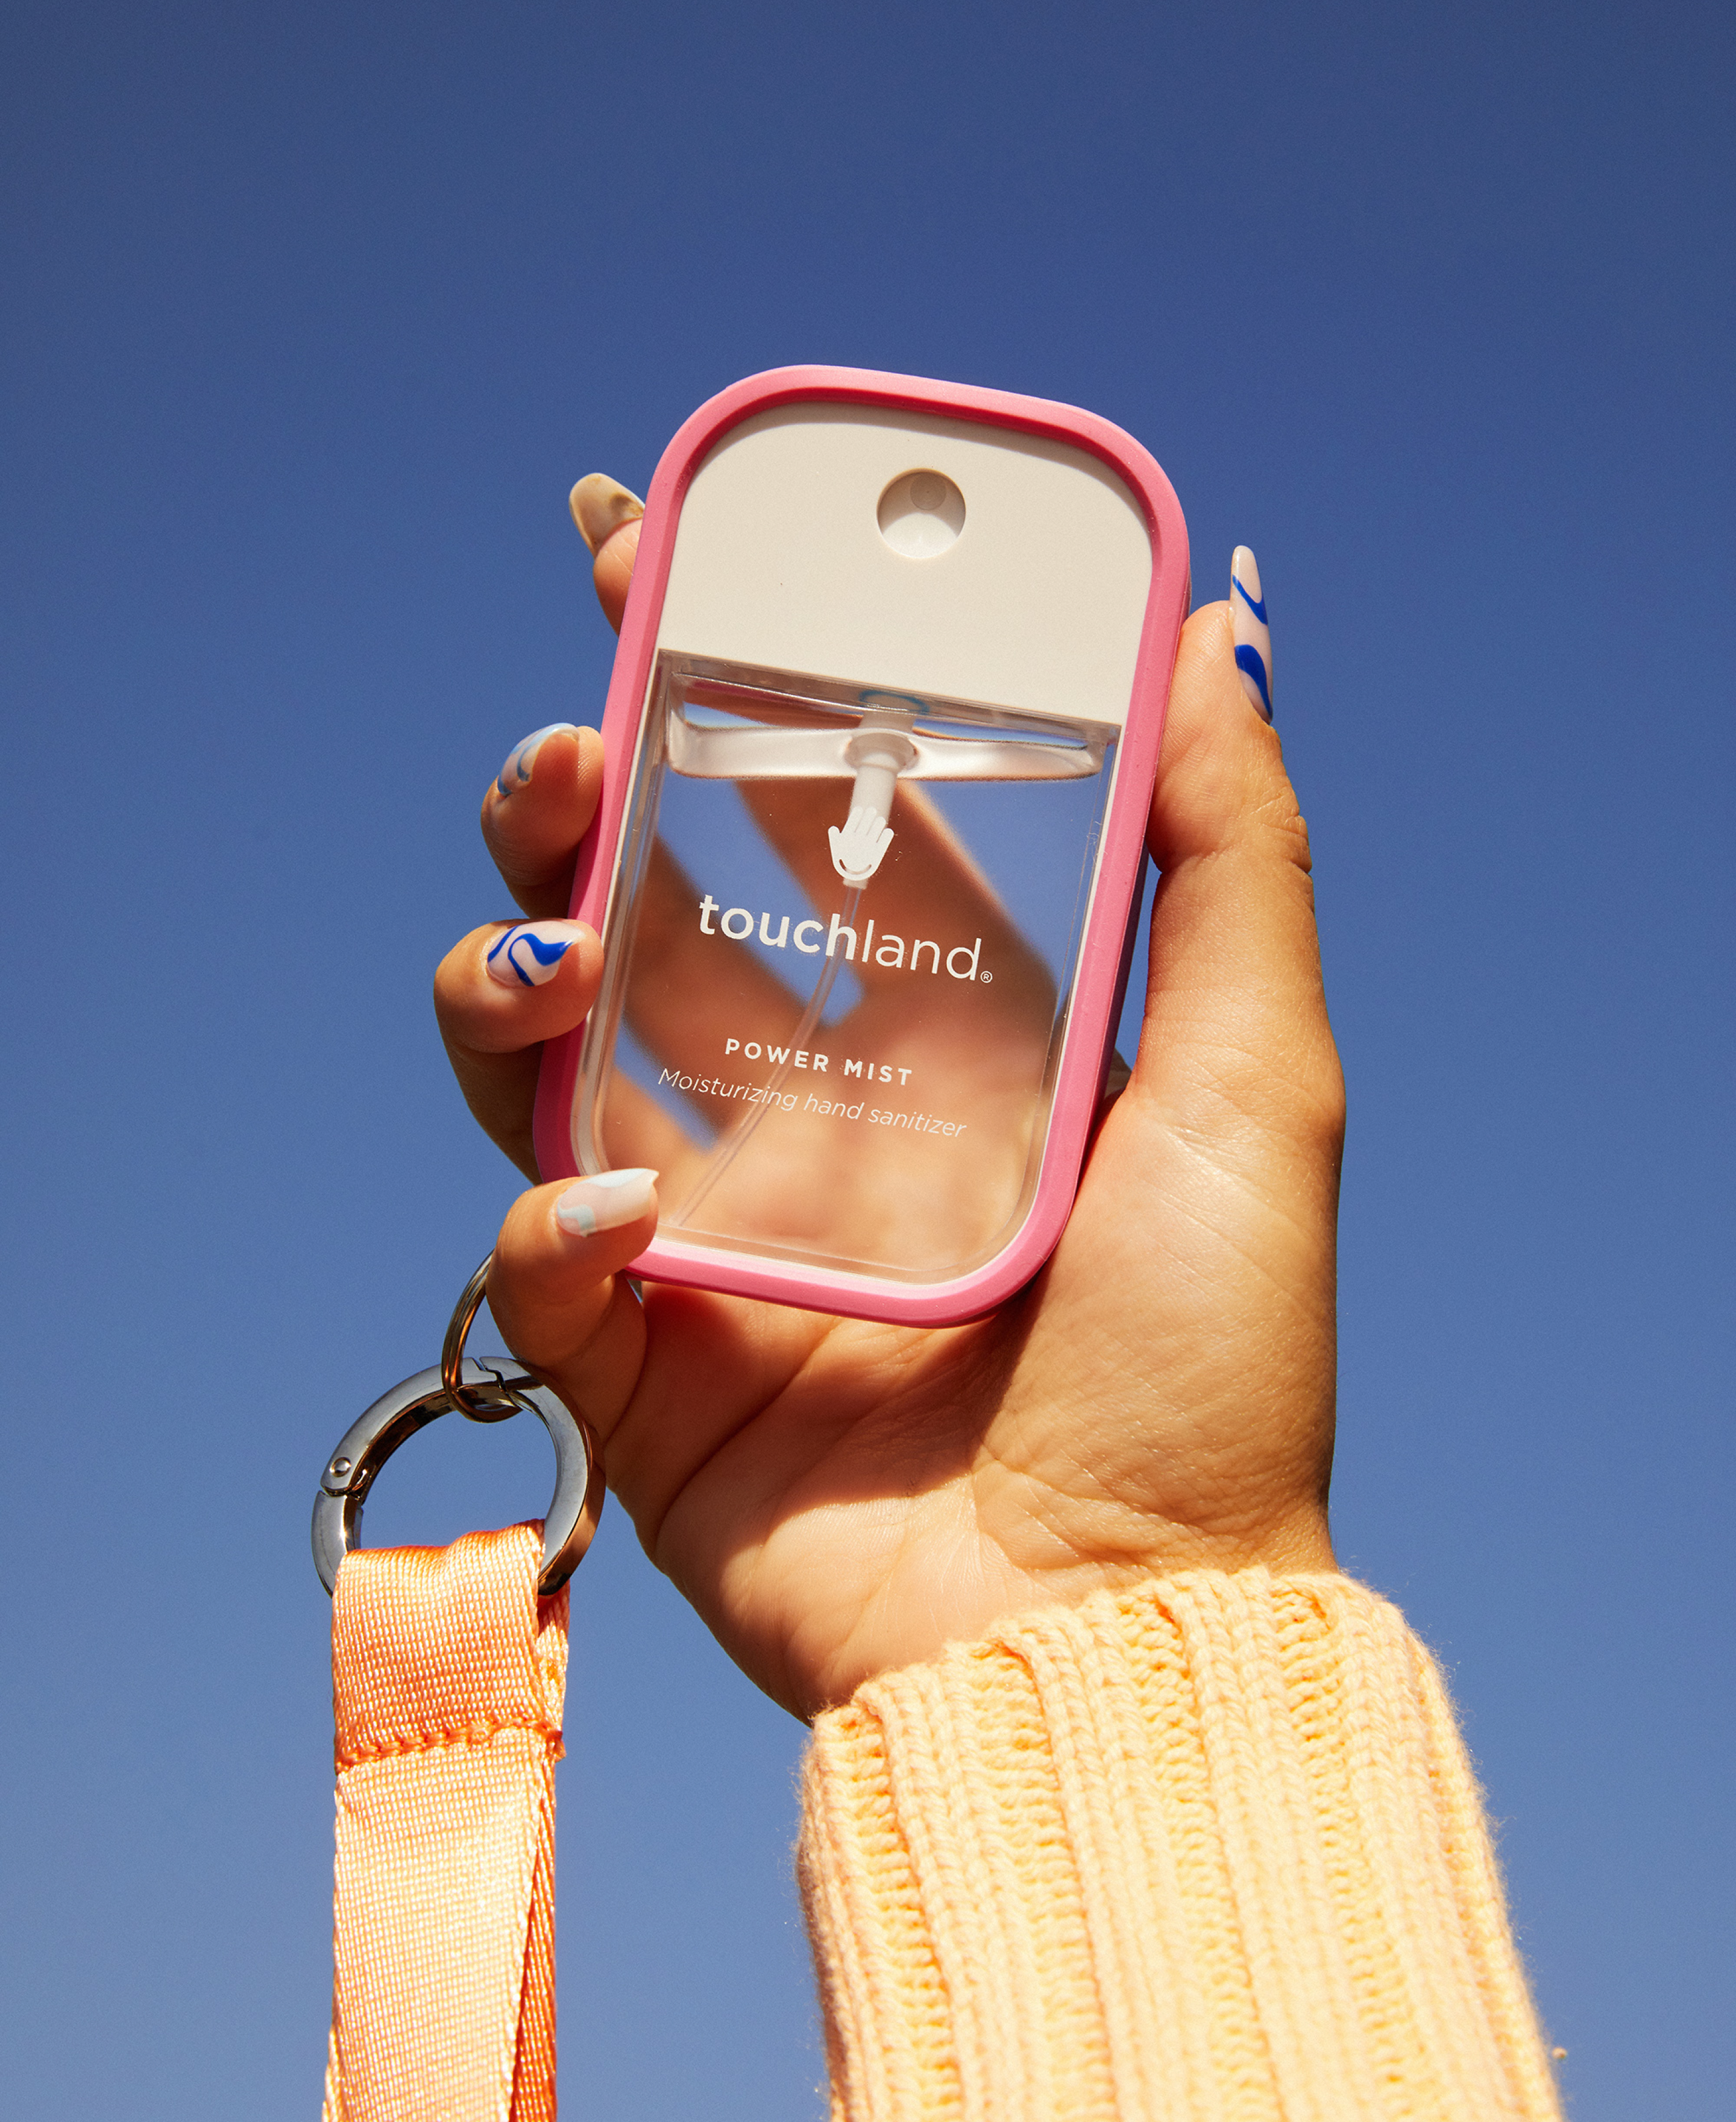 Lady's hand holding a Power Mist hydrating hand sanitizer with a pink case and a lanyard attached